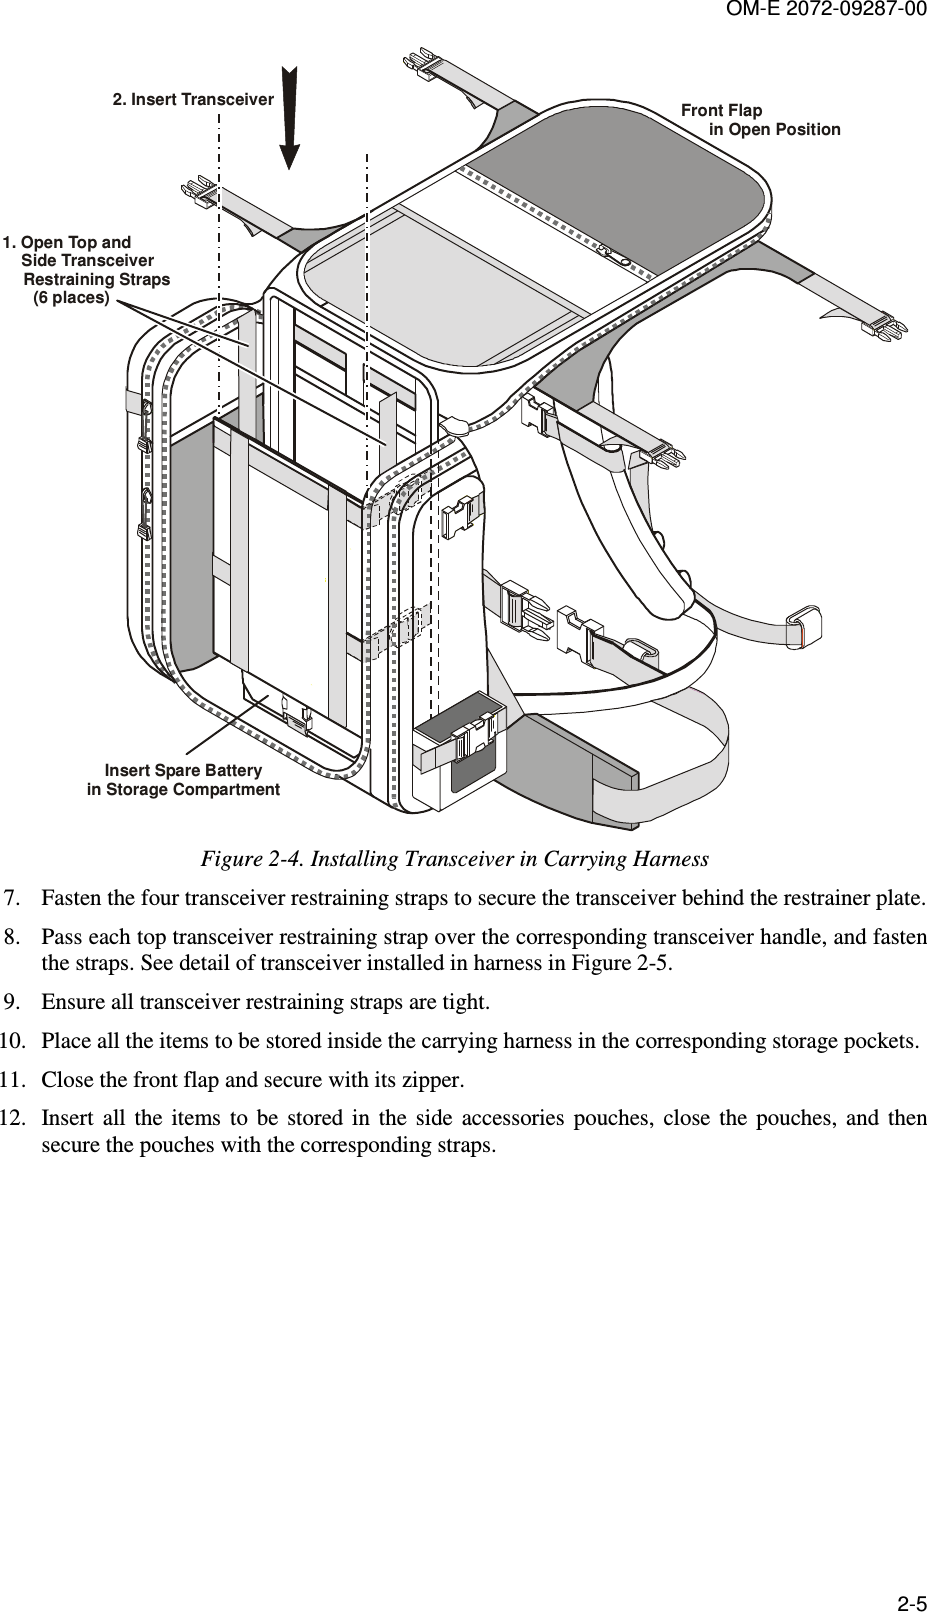 OM-E 2072-09287-00 2-5 Front Flap      in Open Position1. Open Top and          Side Transceiver             Restraining Straps  (6 places)2. Insert TransceiverInsert Spare Batteryin Storage Compartment Figure  2-4. Installing Transceiver in Carrying Harness  7. Fasten the four transceiver restraining straps to secure the transceiver behind the restrainer plate. 8. Pass each top transceiver restraining strap over the corresponding transceiver handle, and fasten the straps. See detail of transceiver installed in harness in Figure  2-5. 9. Ensure all transceiver restraining straps are tight. 10. Place all the items to be stored inside the carrying harness in the corresponding storage pockets. 11. Close the front flap and secure with its zipper. 12. Insert  all  the  items  to  be  stored  in  the  side  accessories  pouches,  close  the  pouches,  and  then secure the pouches with the corresponding straps. 